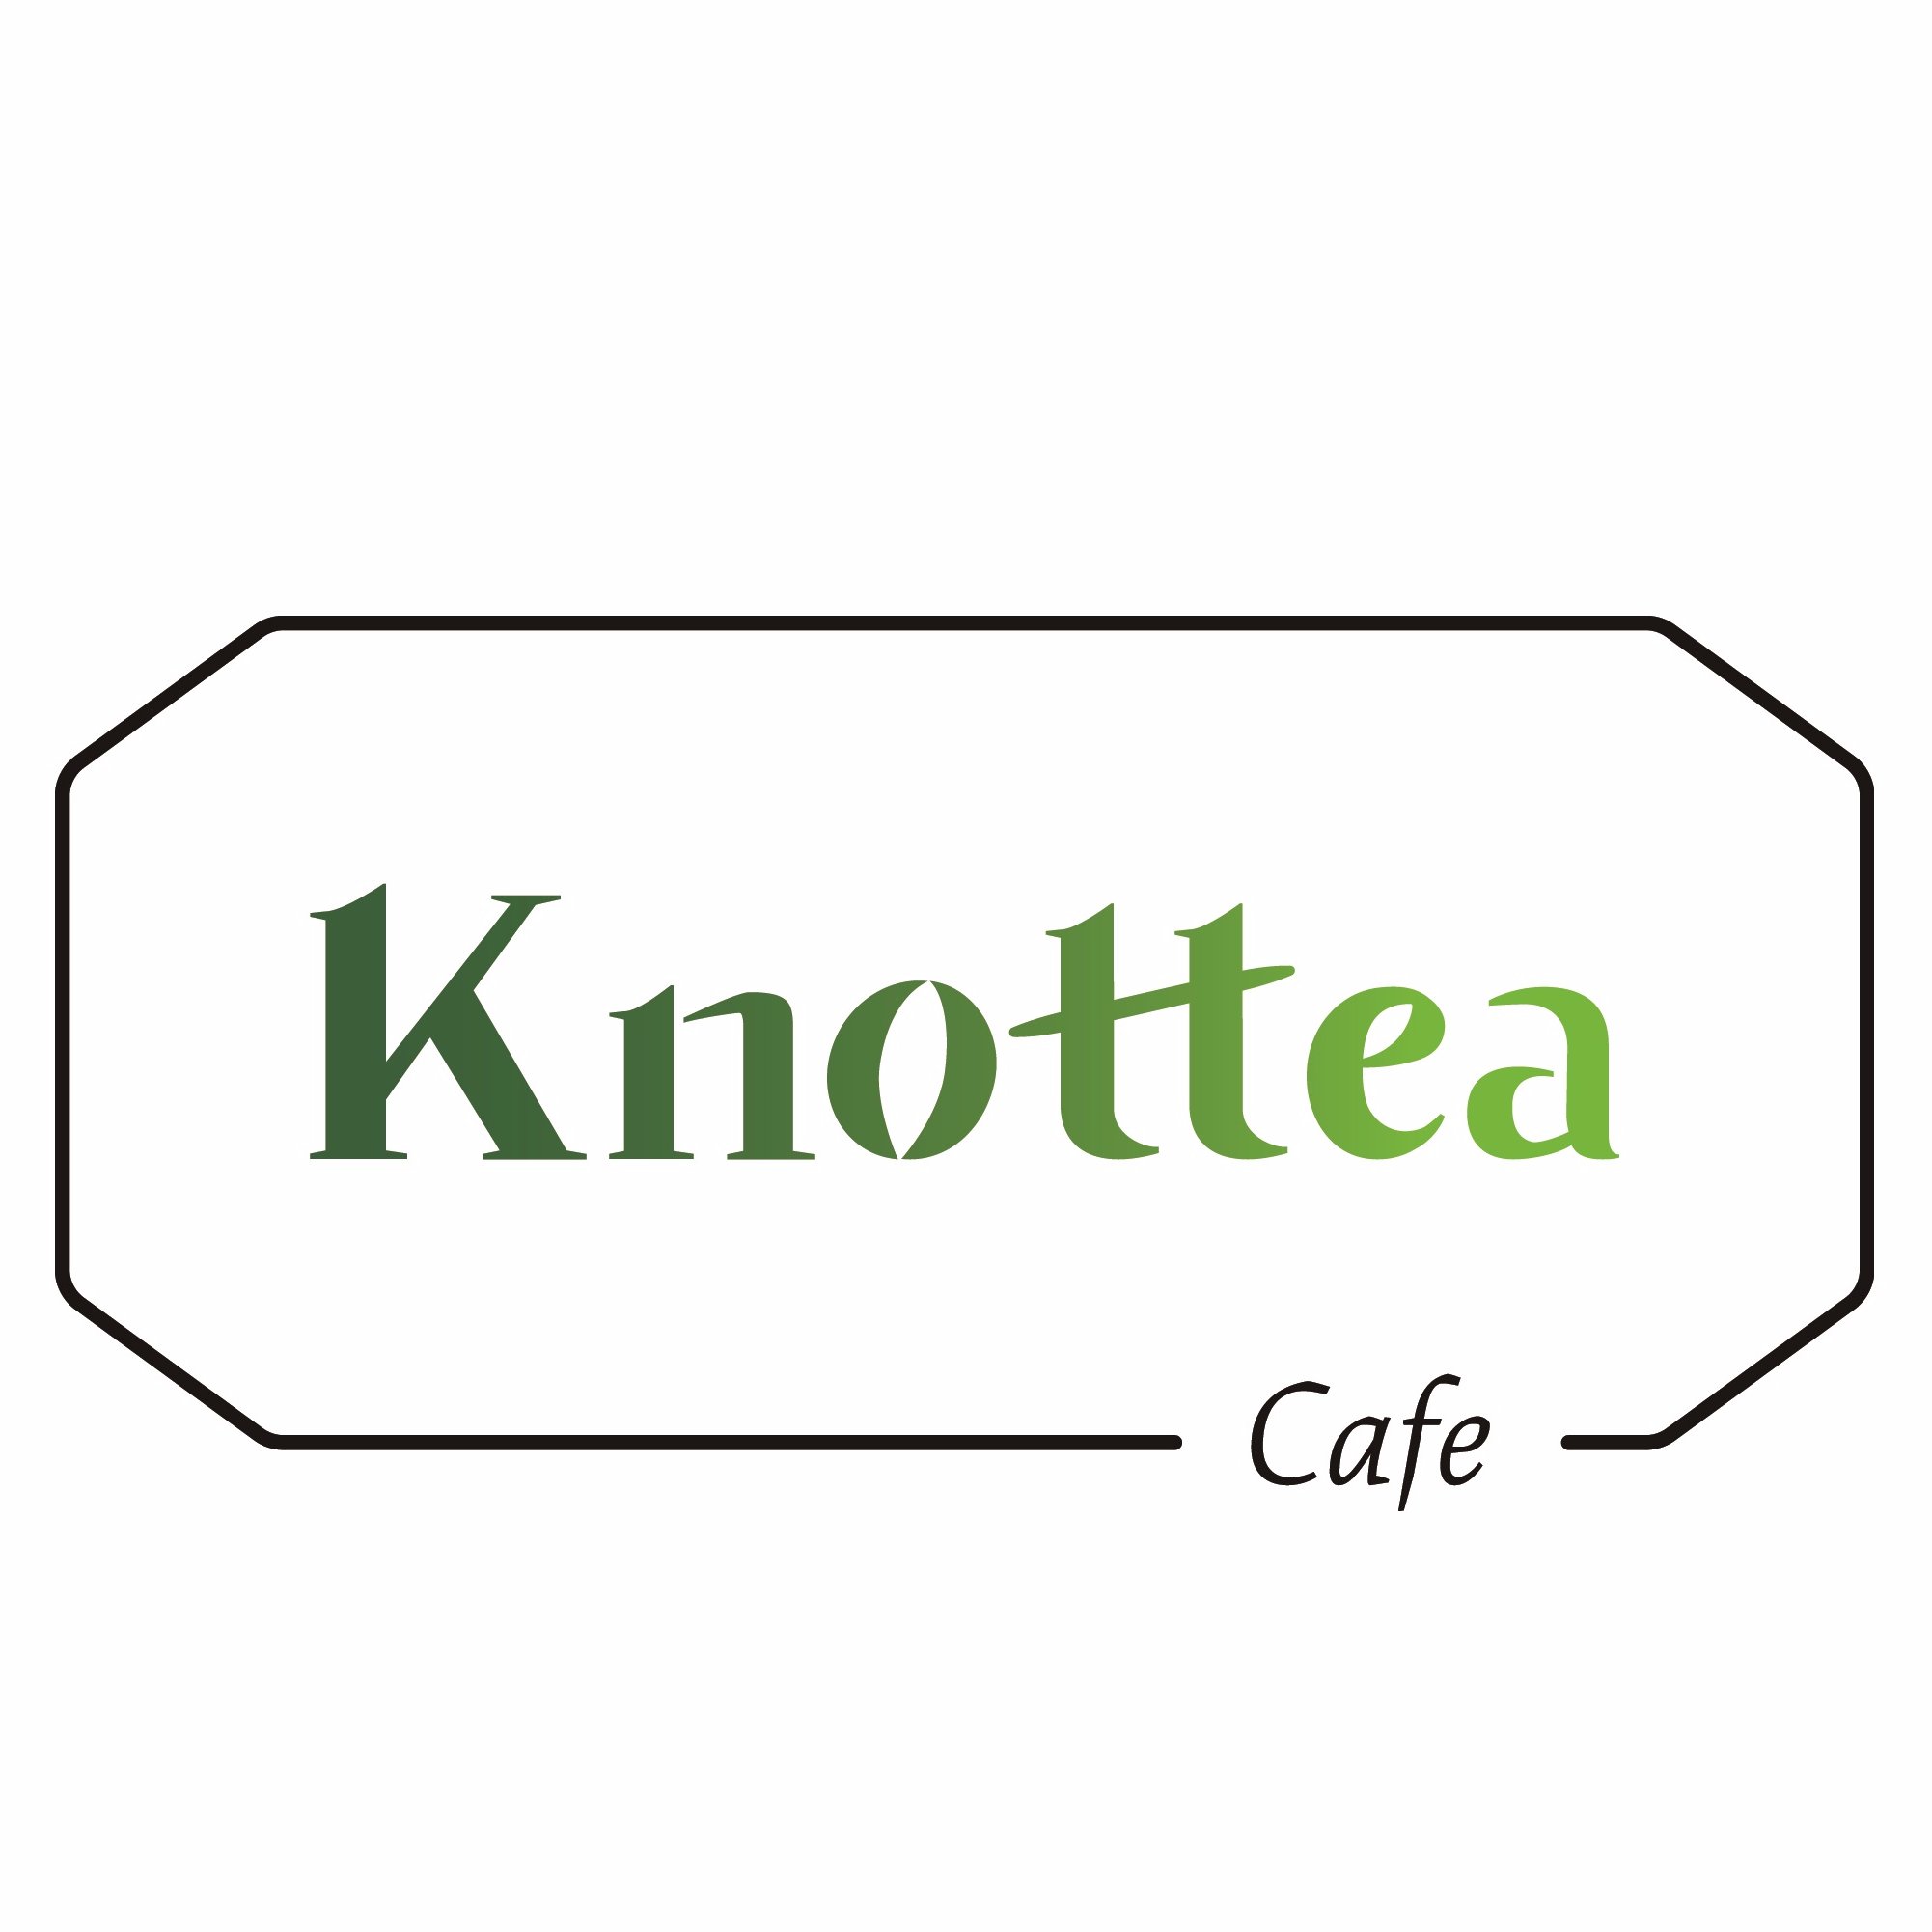 Chic neighborhood café offering refreshing drinks and snacks with a hint of Knottea